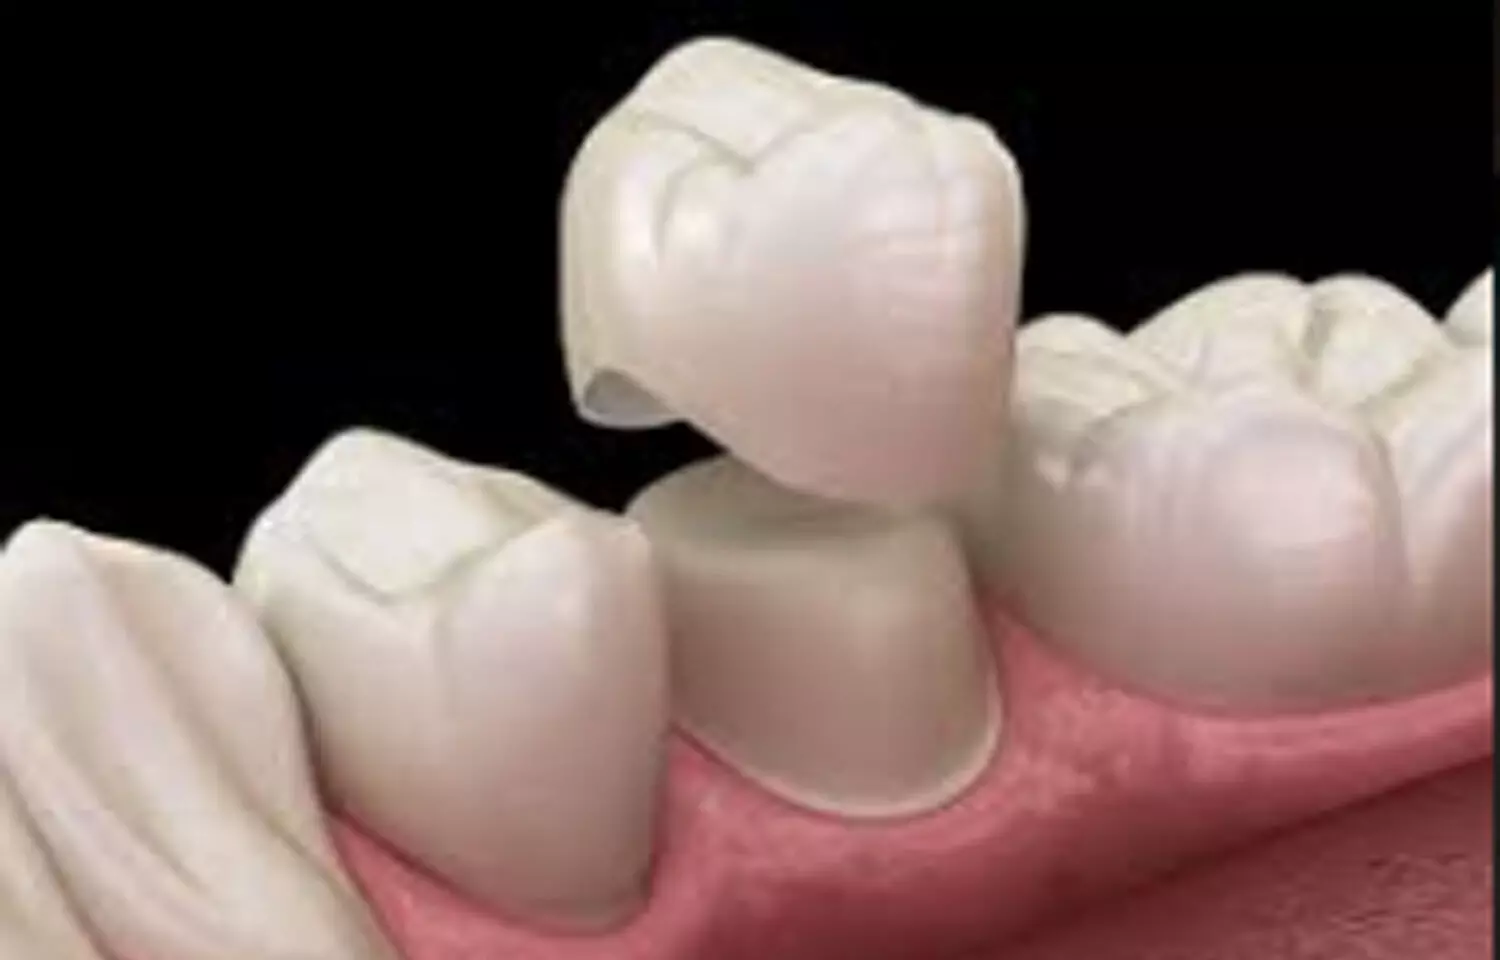 CM cement capable of retaining lithium disilicate crowns, Finds study